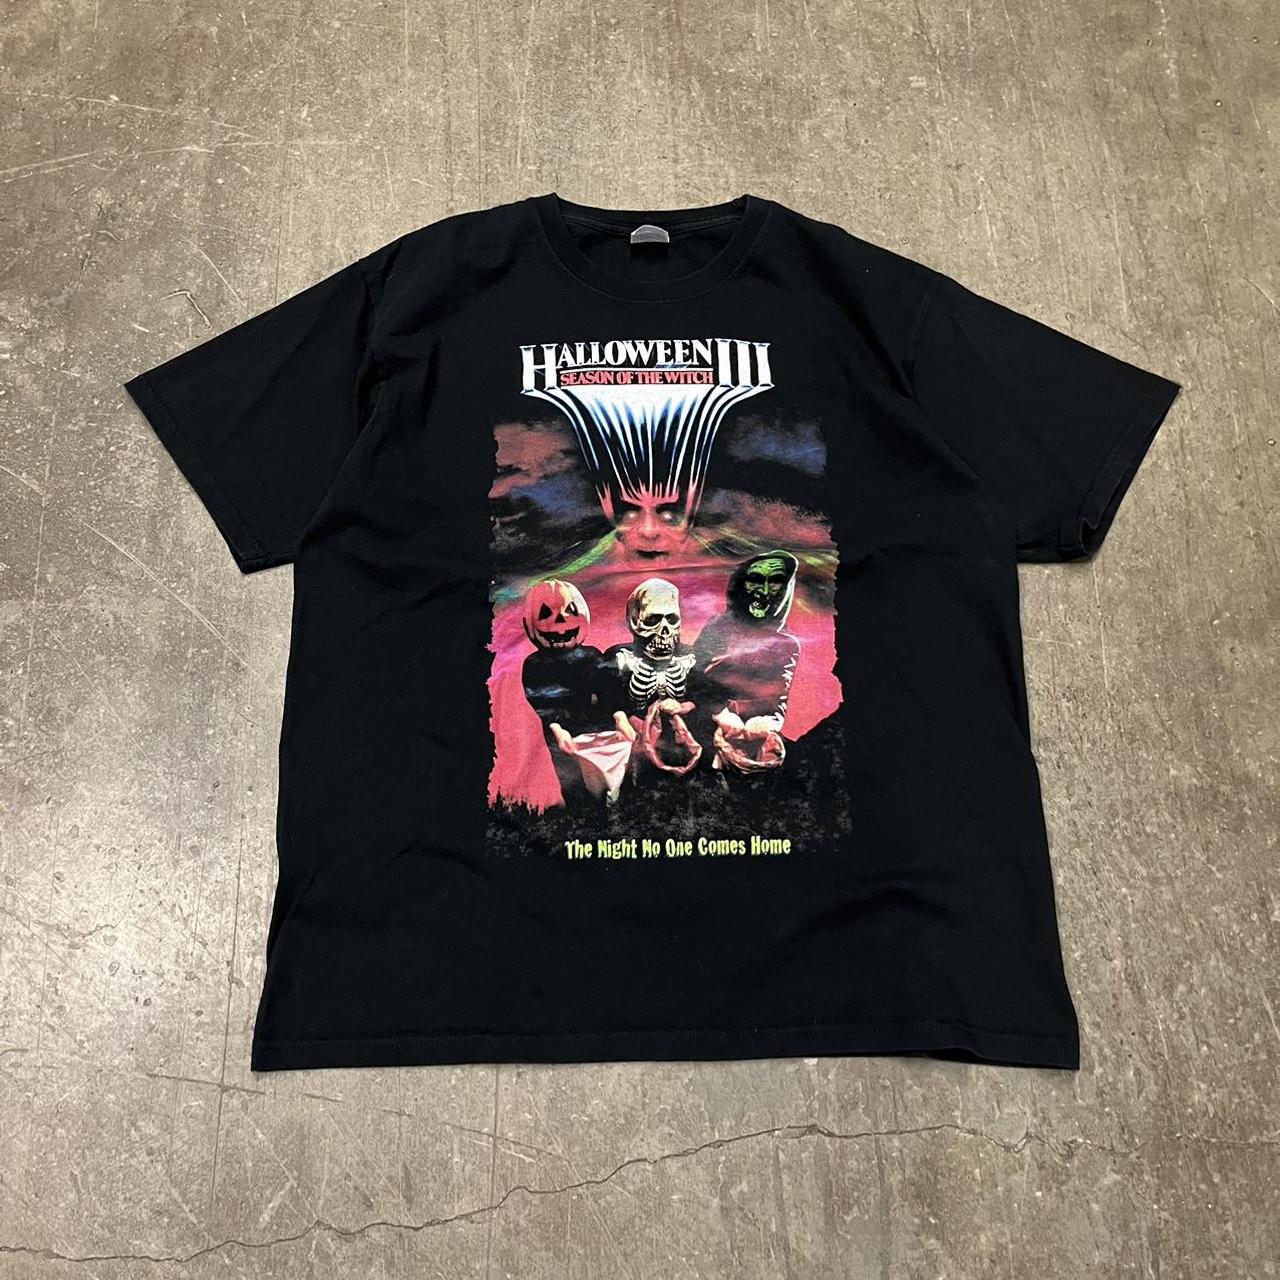 Vintage Halloween 3 Season of the Witch shirt size... - Depop